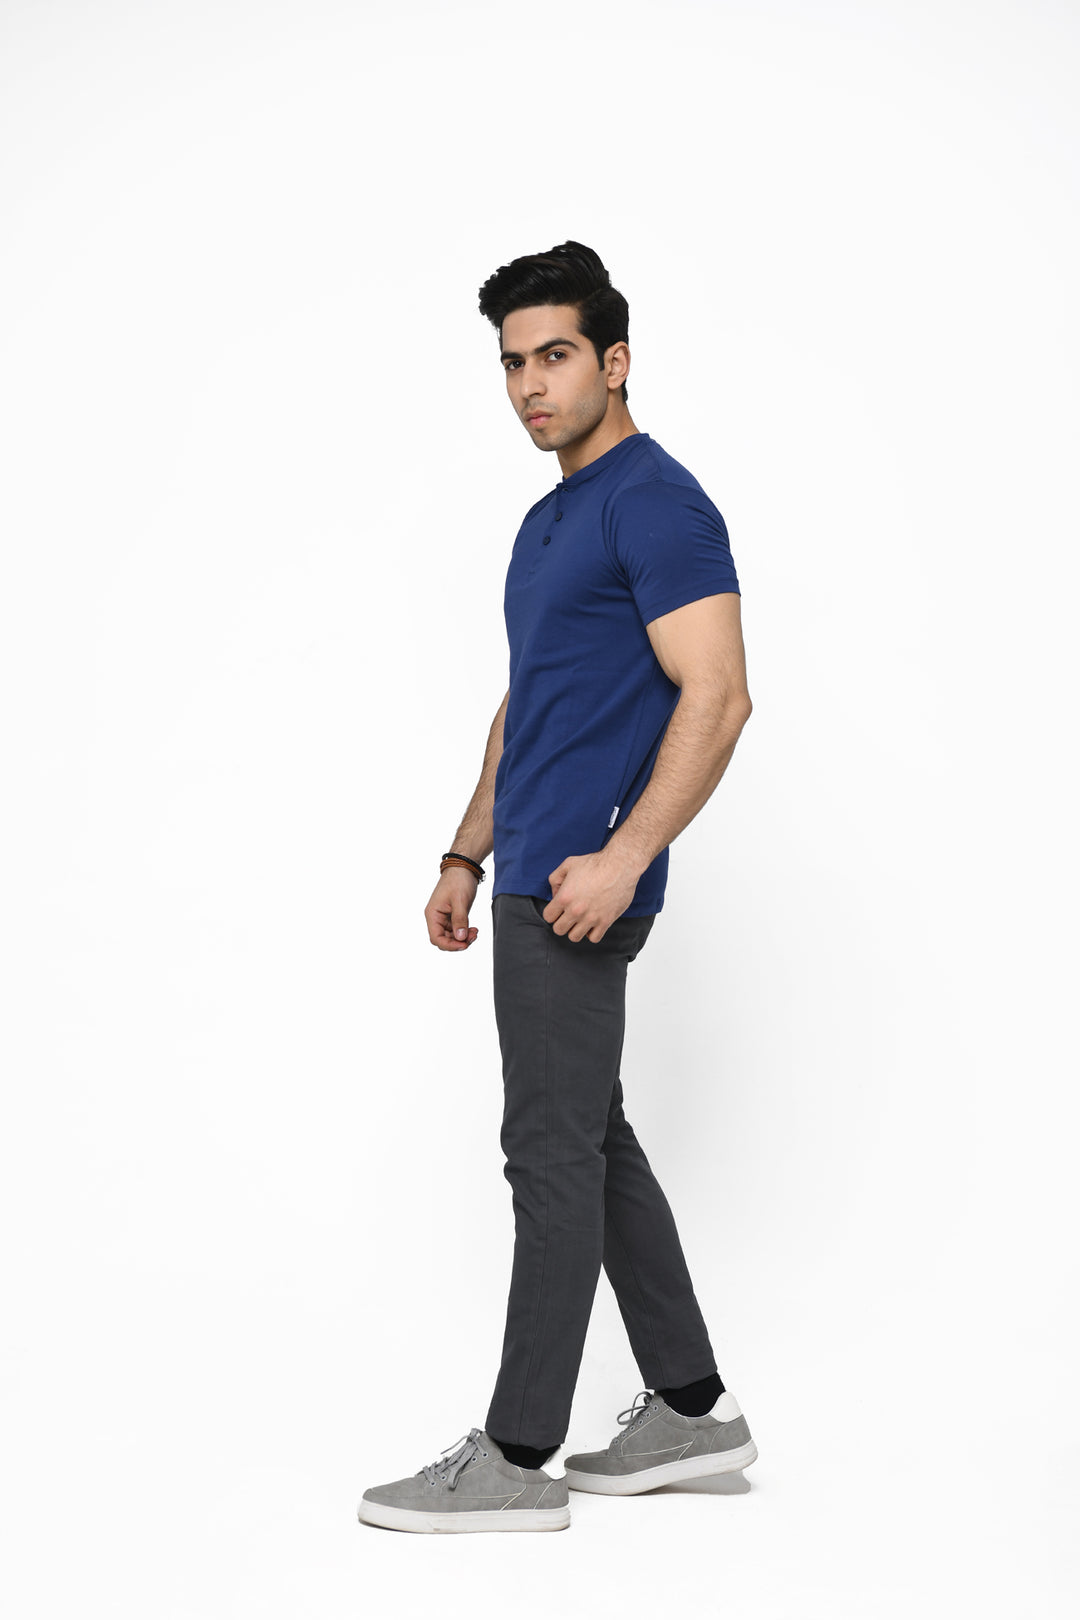 RELAXED FIT HENELY T-SHIRT